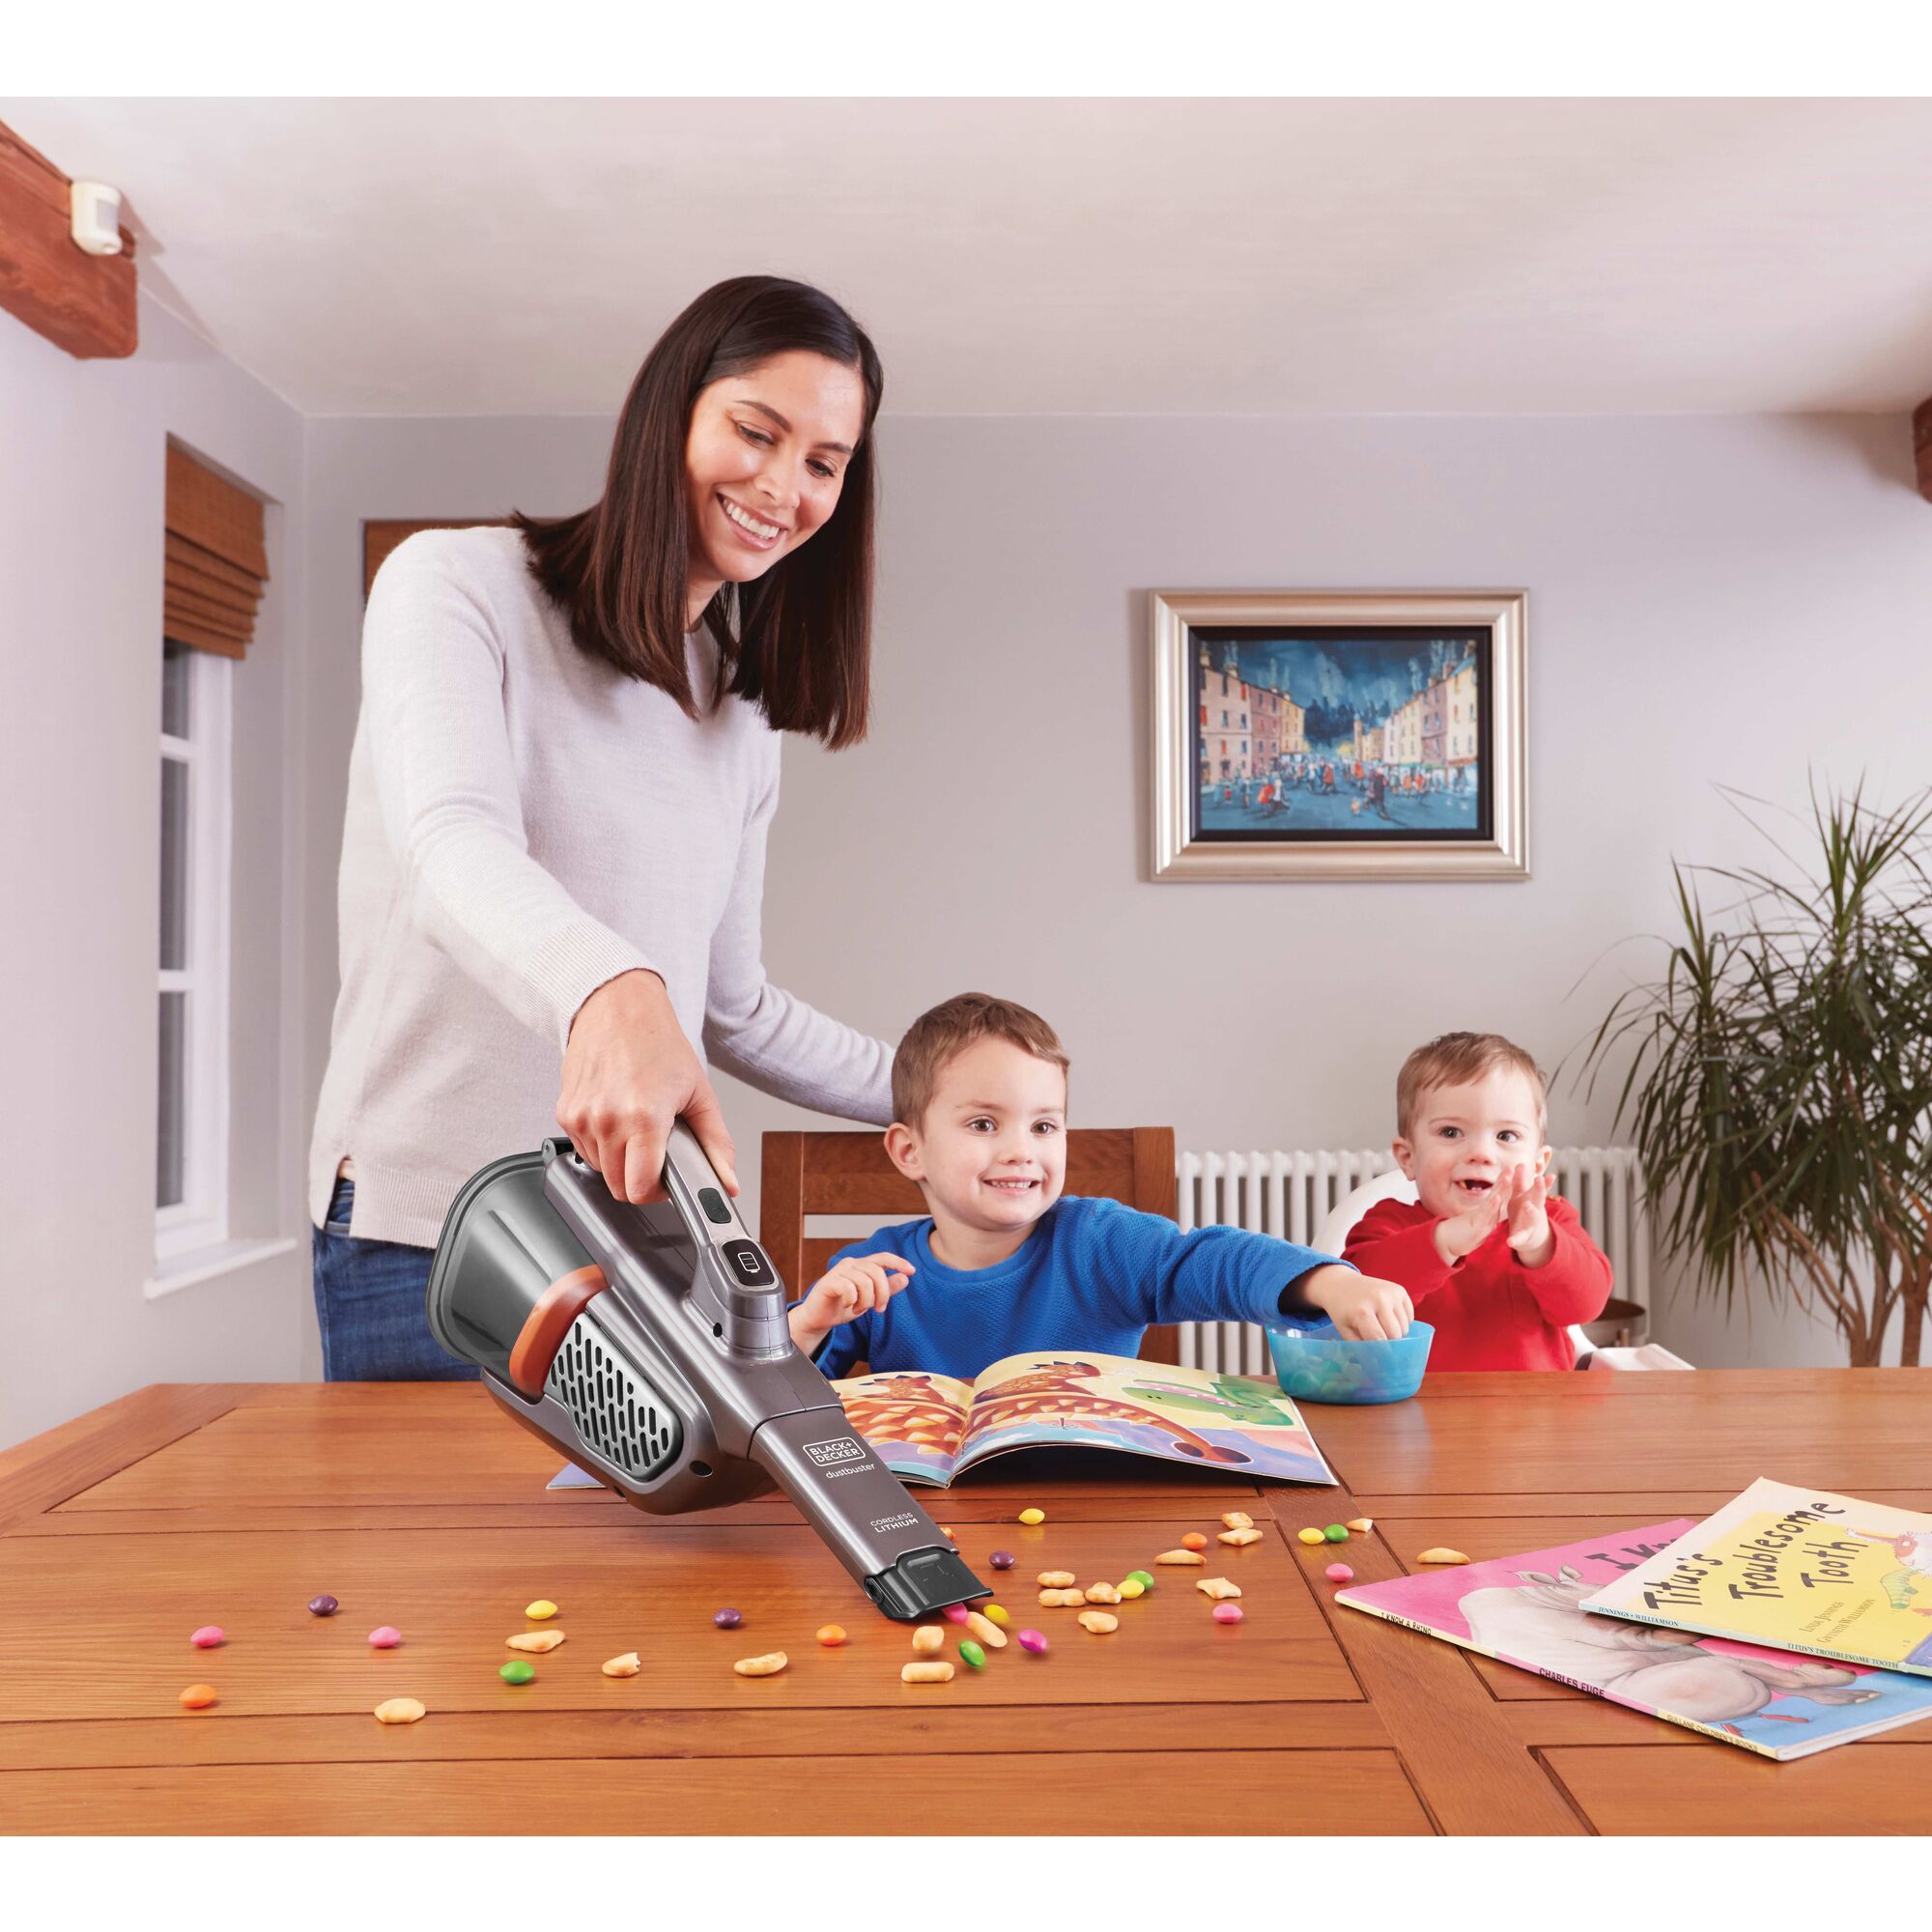 Dustbuster advanced clean plus cordless hand vacuum with powered pet head being used by a person to clean table.\n